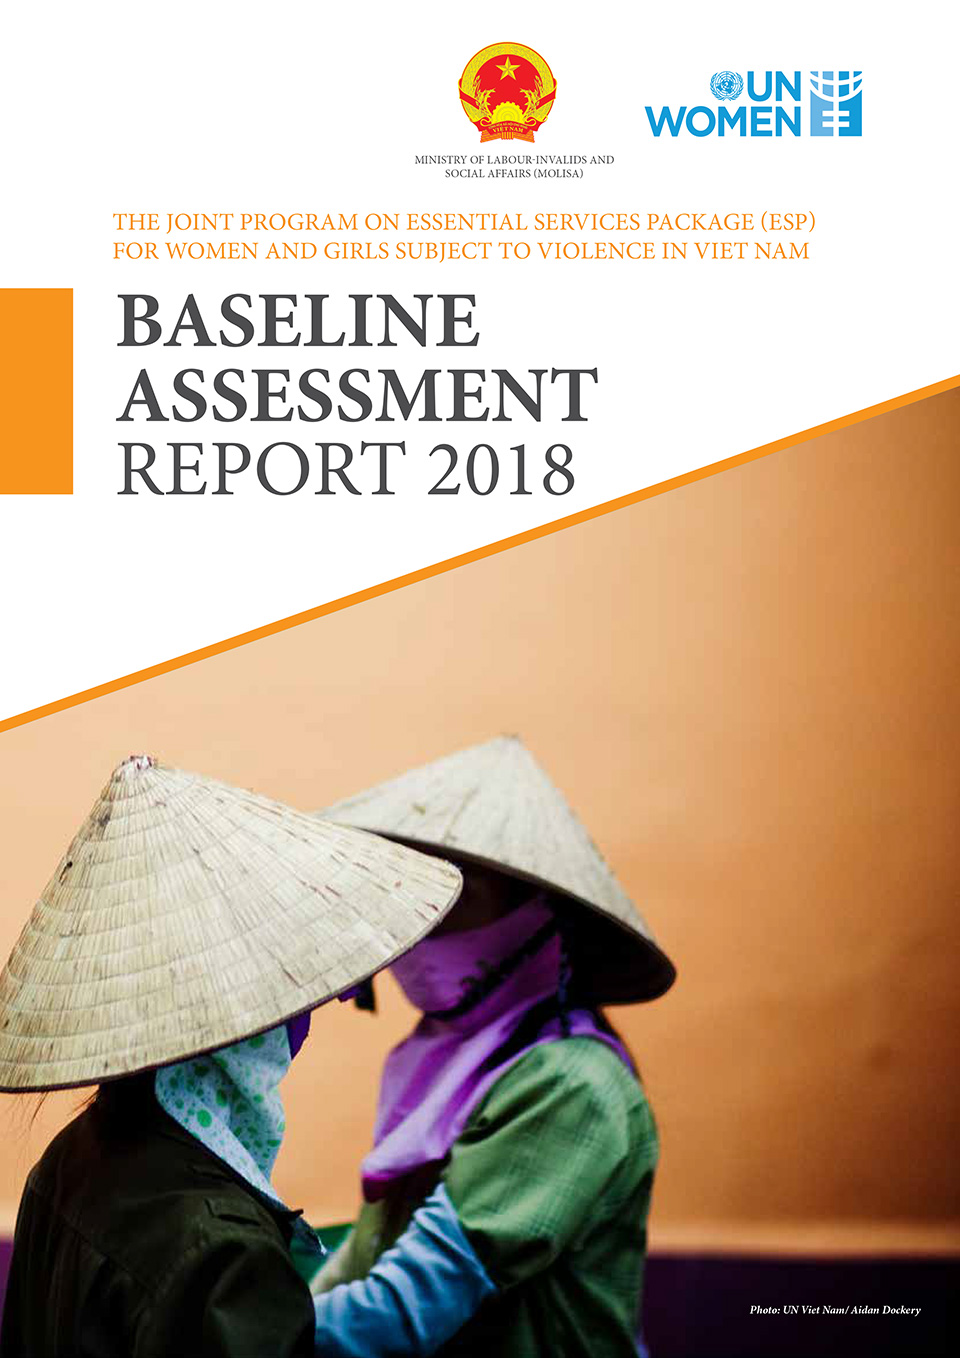 Essential Services Package  for Women and Girls subject to Violence - The Baseline Assessment Report in Viet Nam